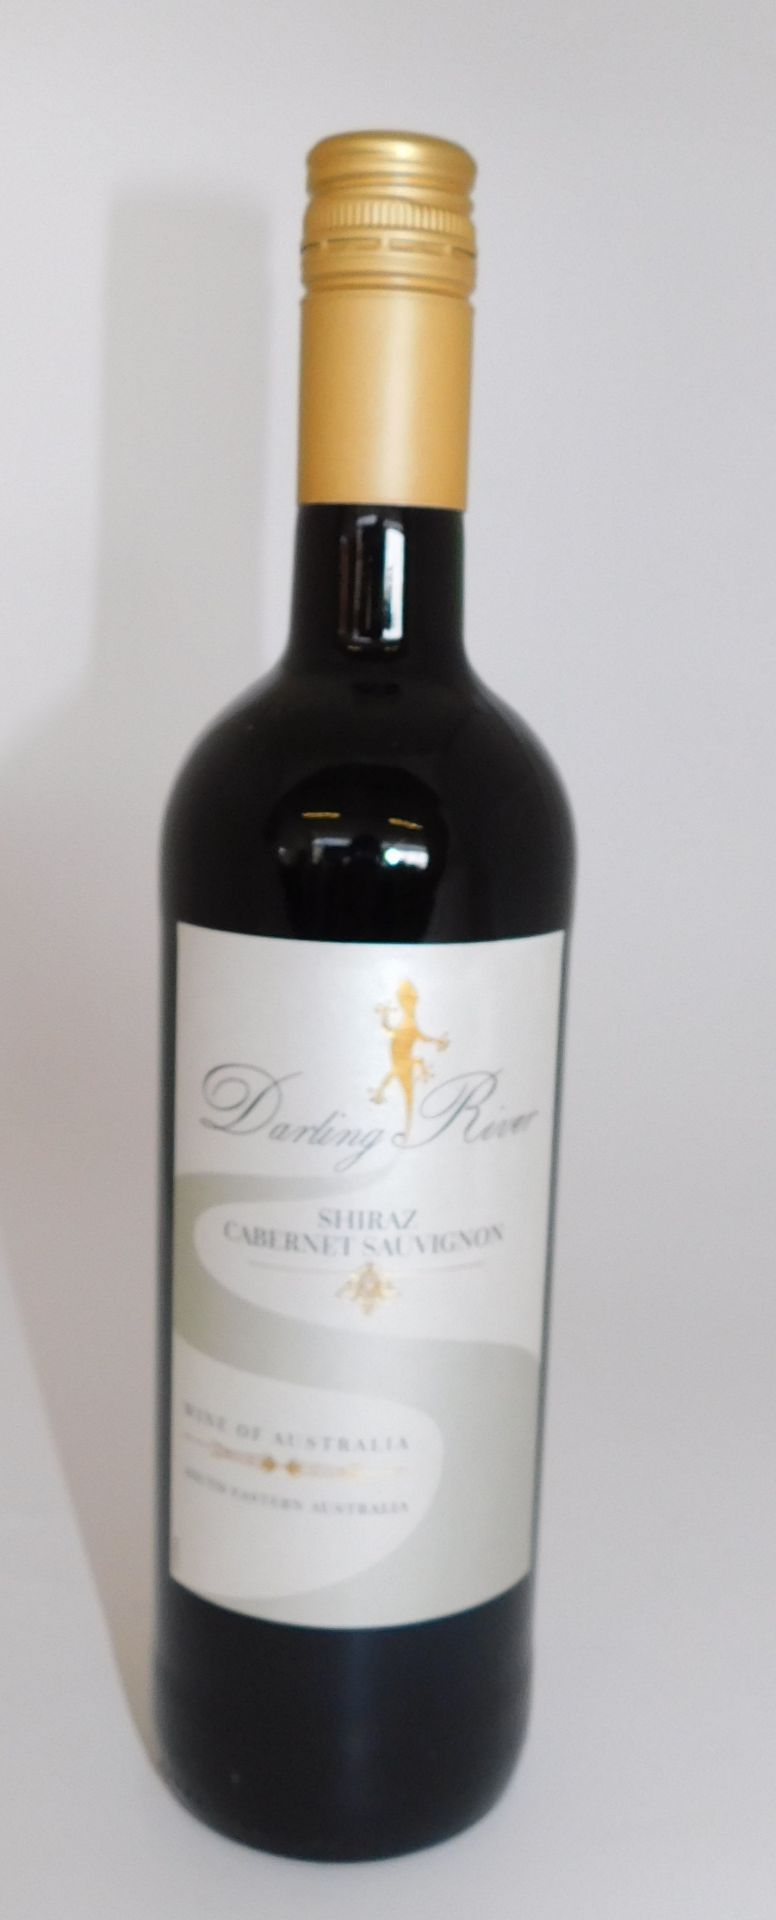 18 Bottles of Darling River Shiraz Cabernet Sauvignon, 750ml (Located Stockport – See General